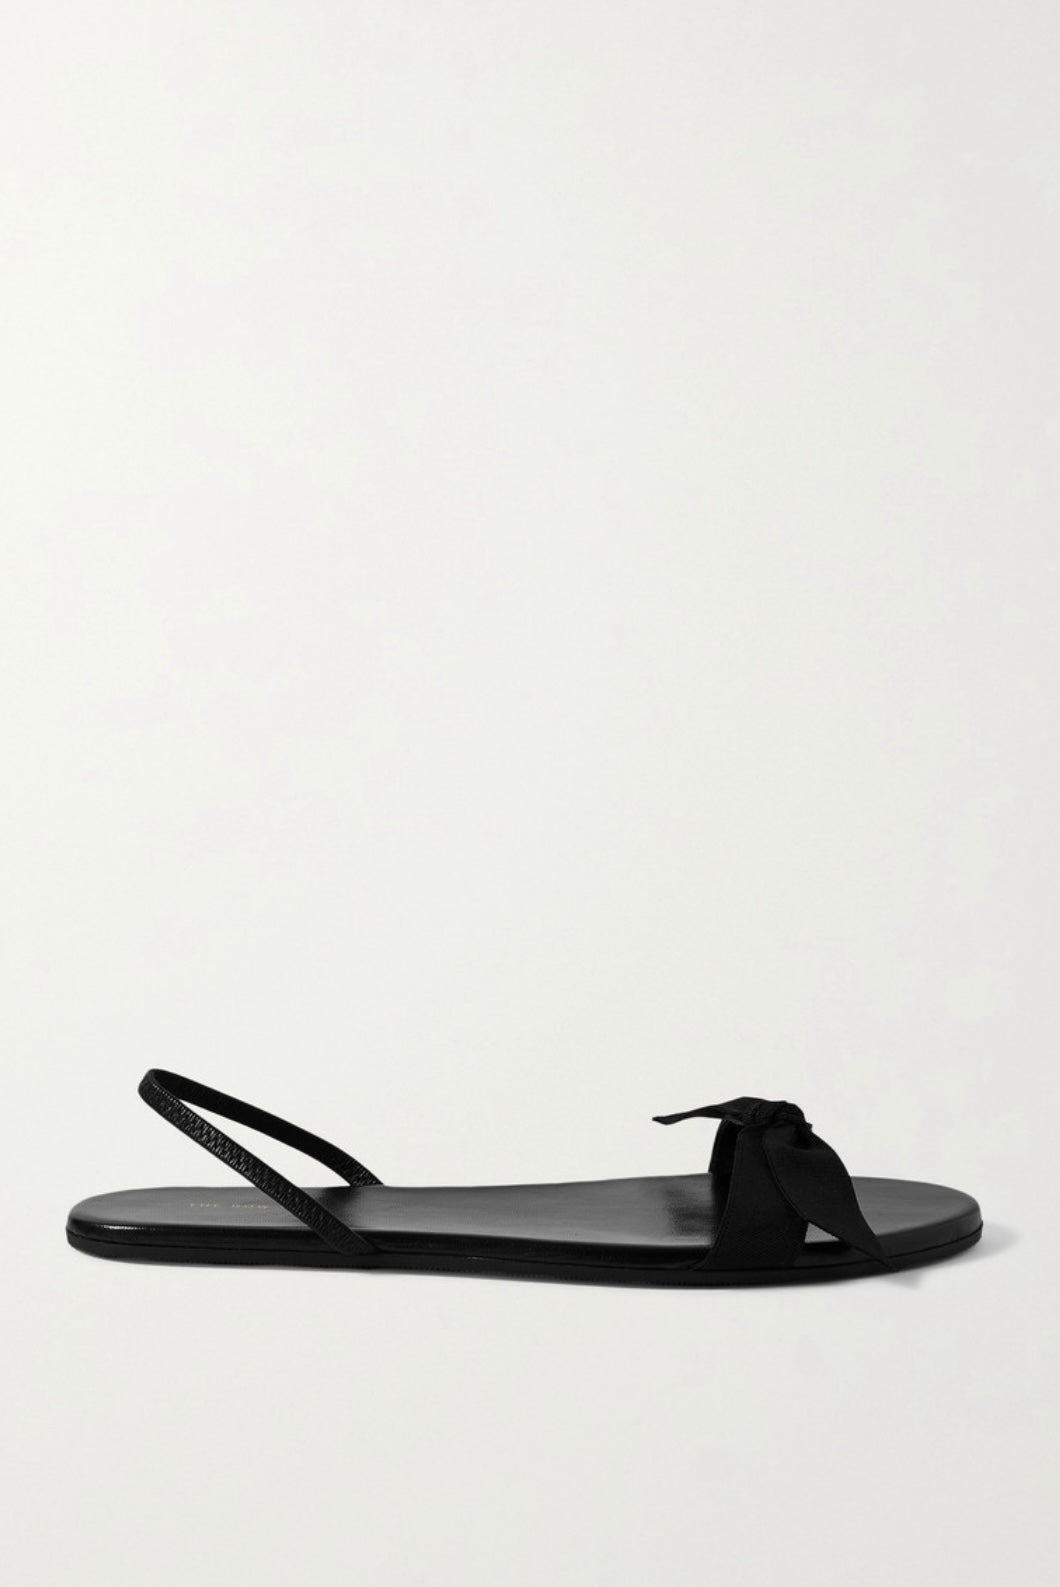 THE ROW - Bow Sandals